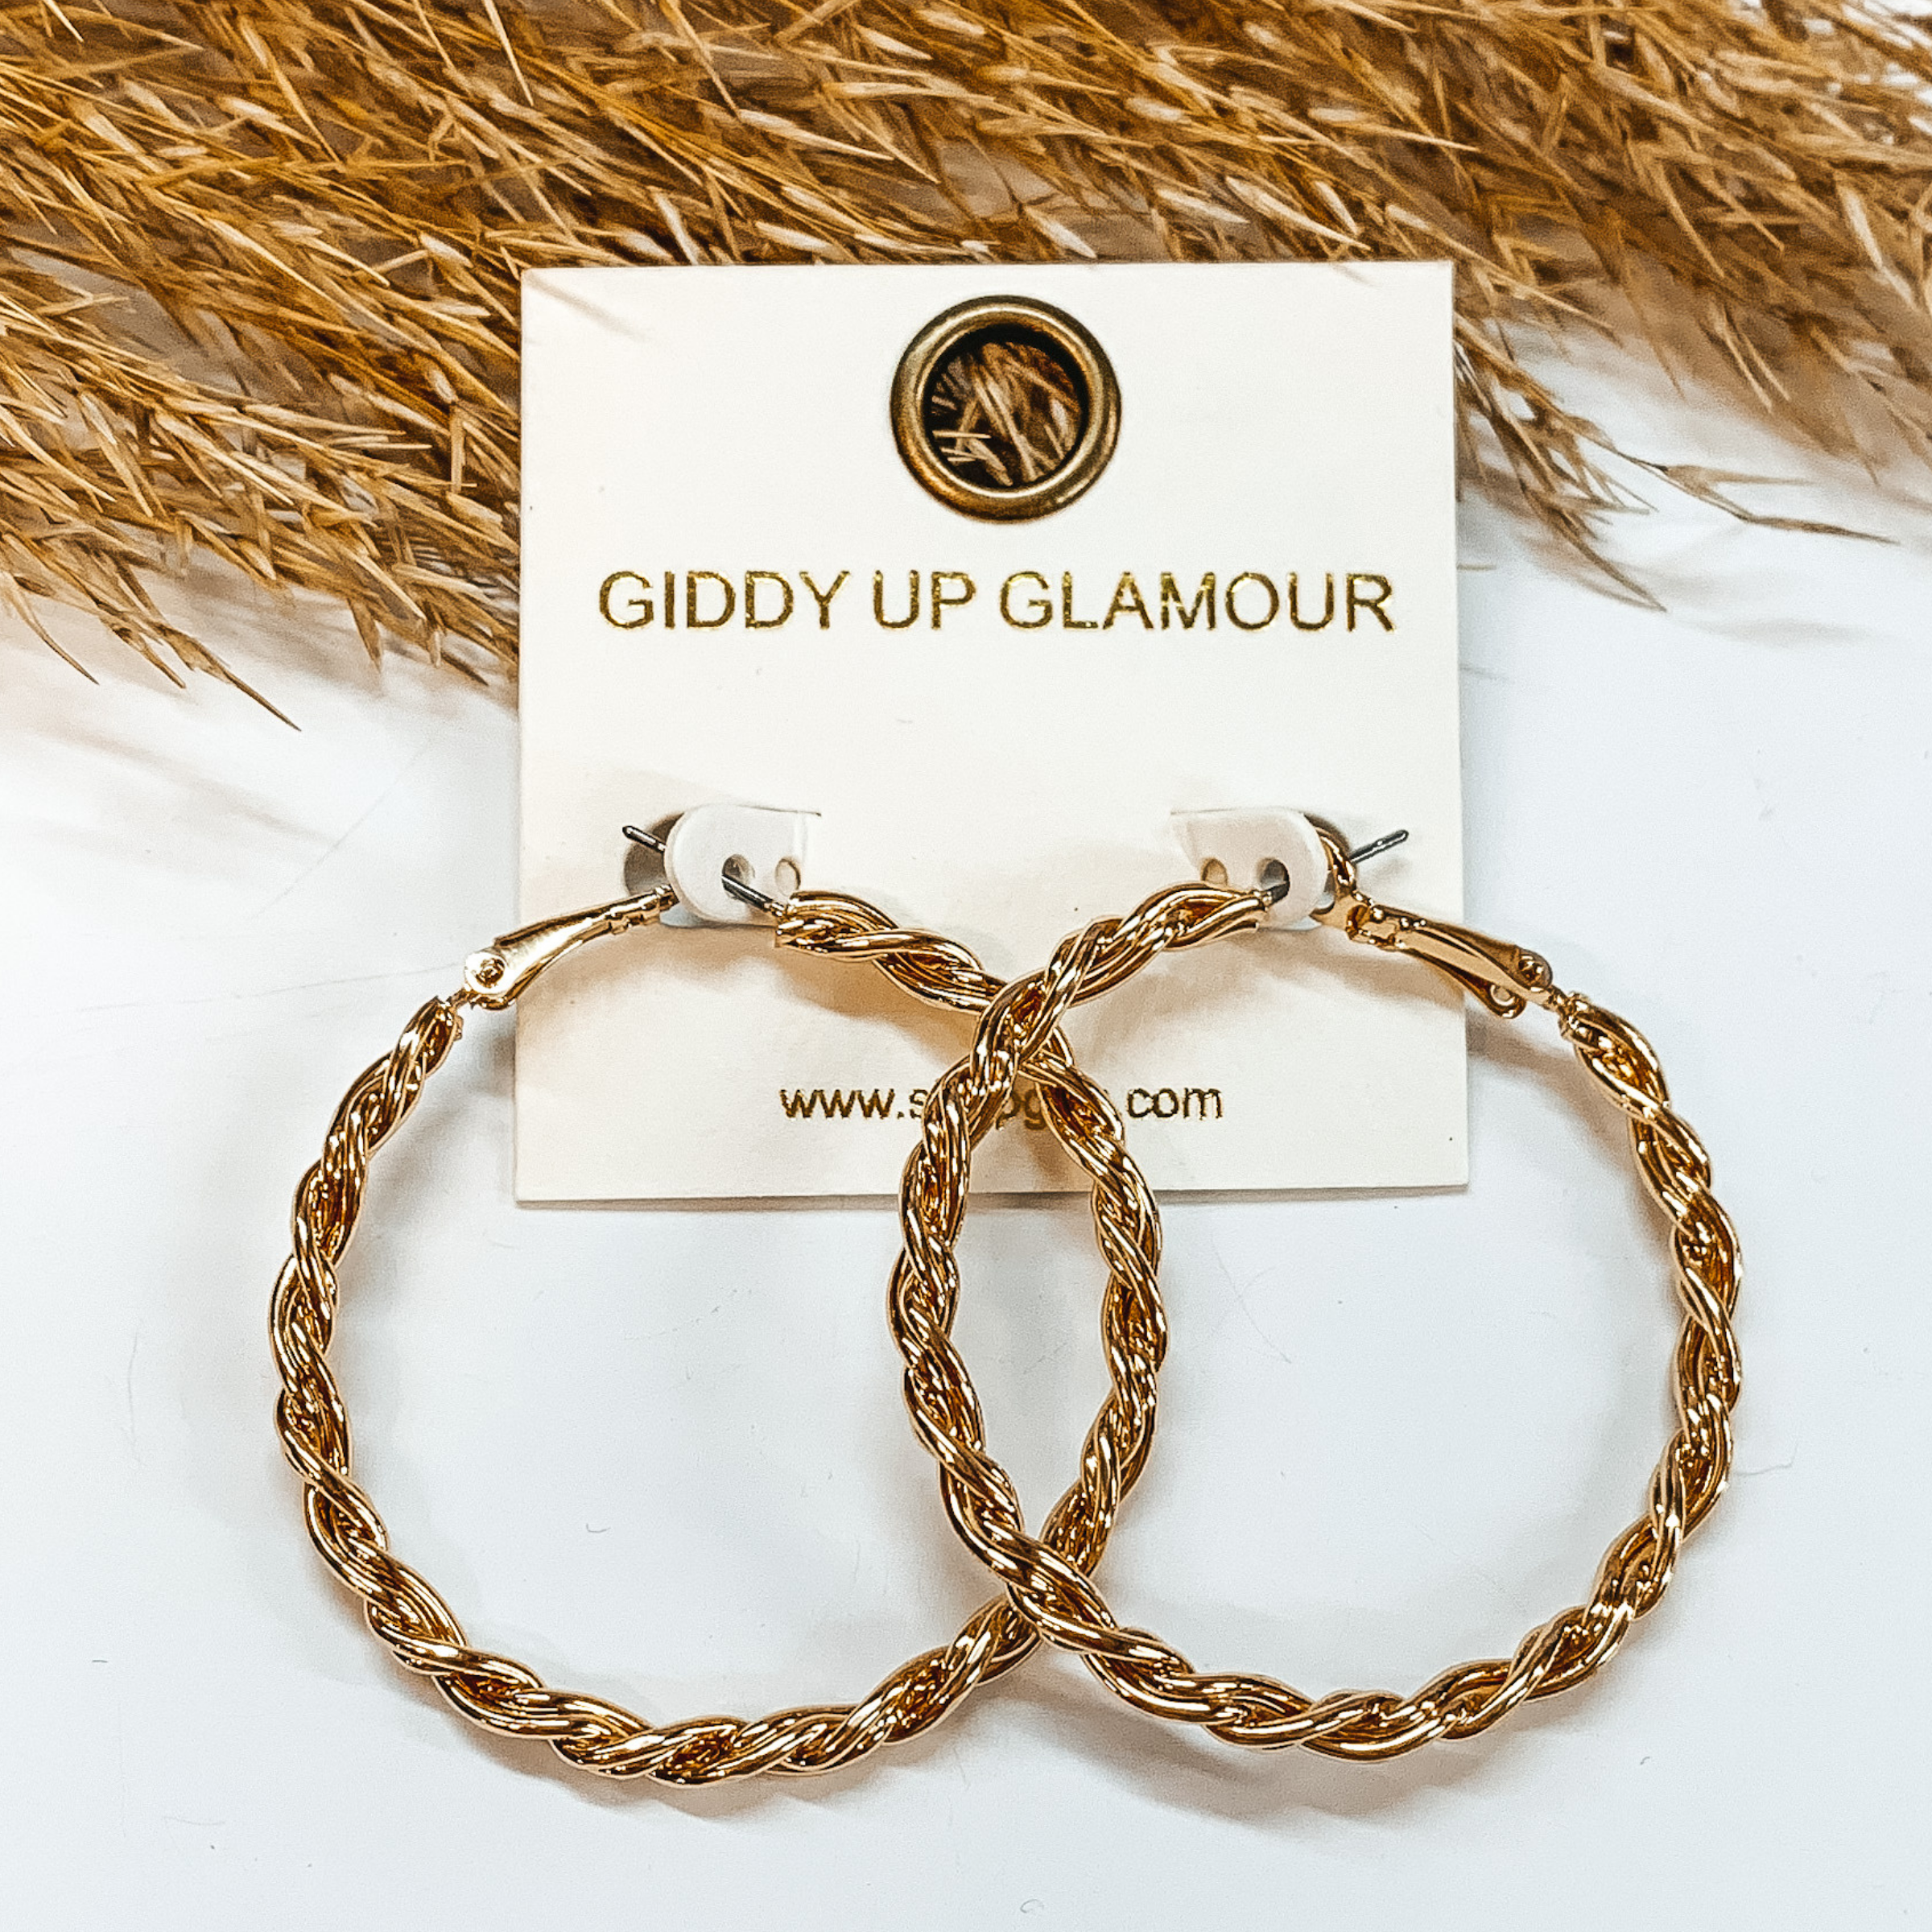 These are thick twisted gold hoops. Taken in a  white background with a brown plant as decor.